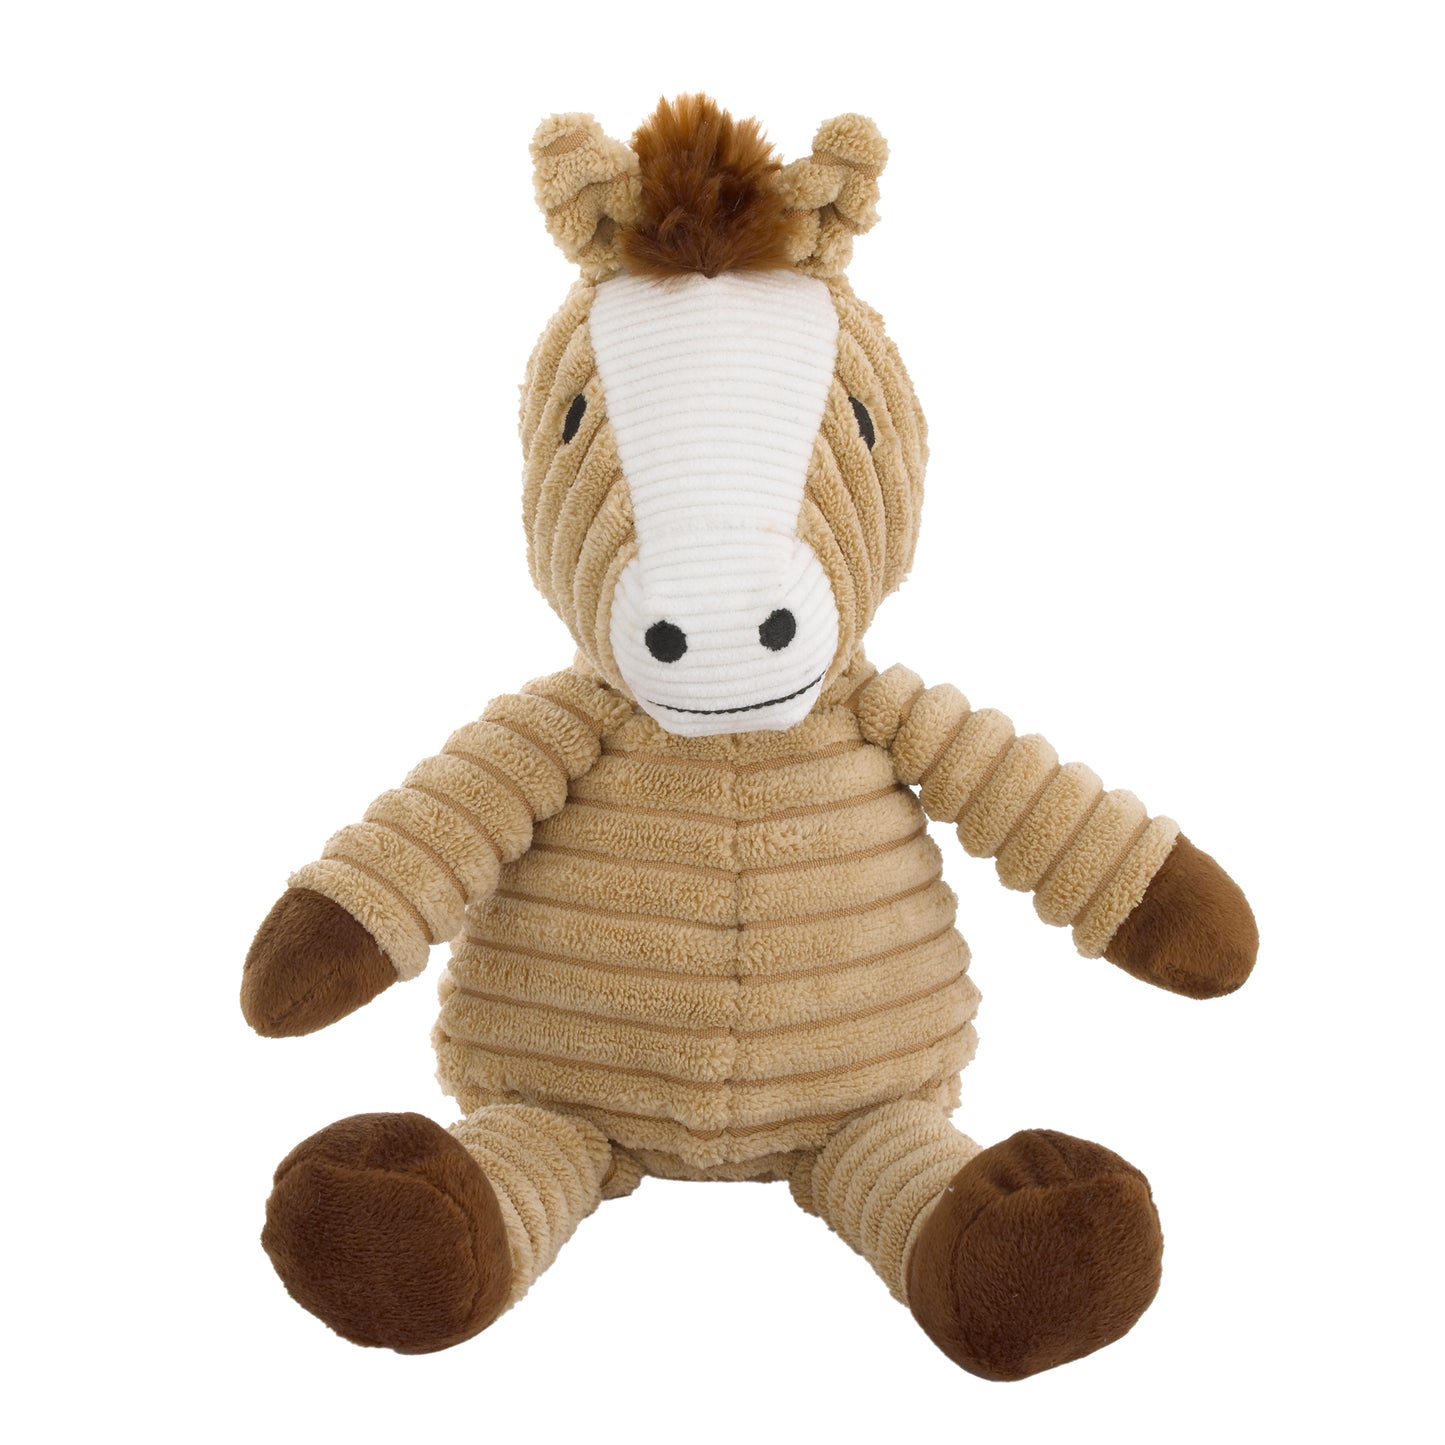 NoJo Dusty the Horse Tan and Brown Super Soft Plush Stuffed Animal